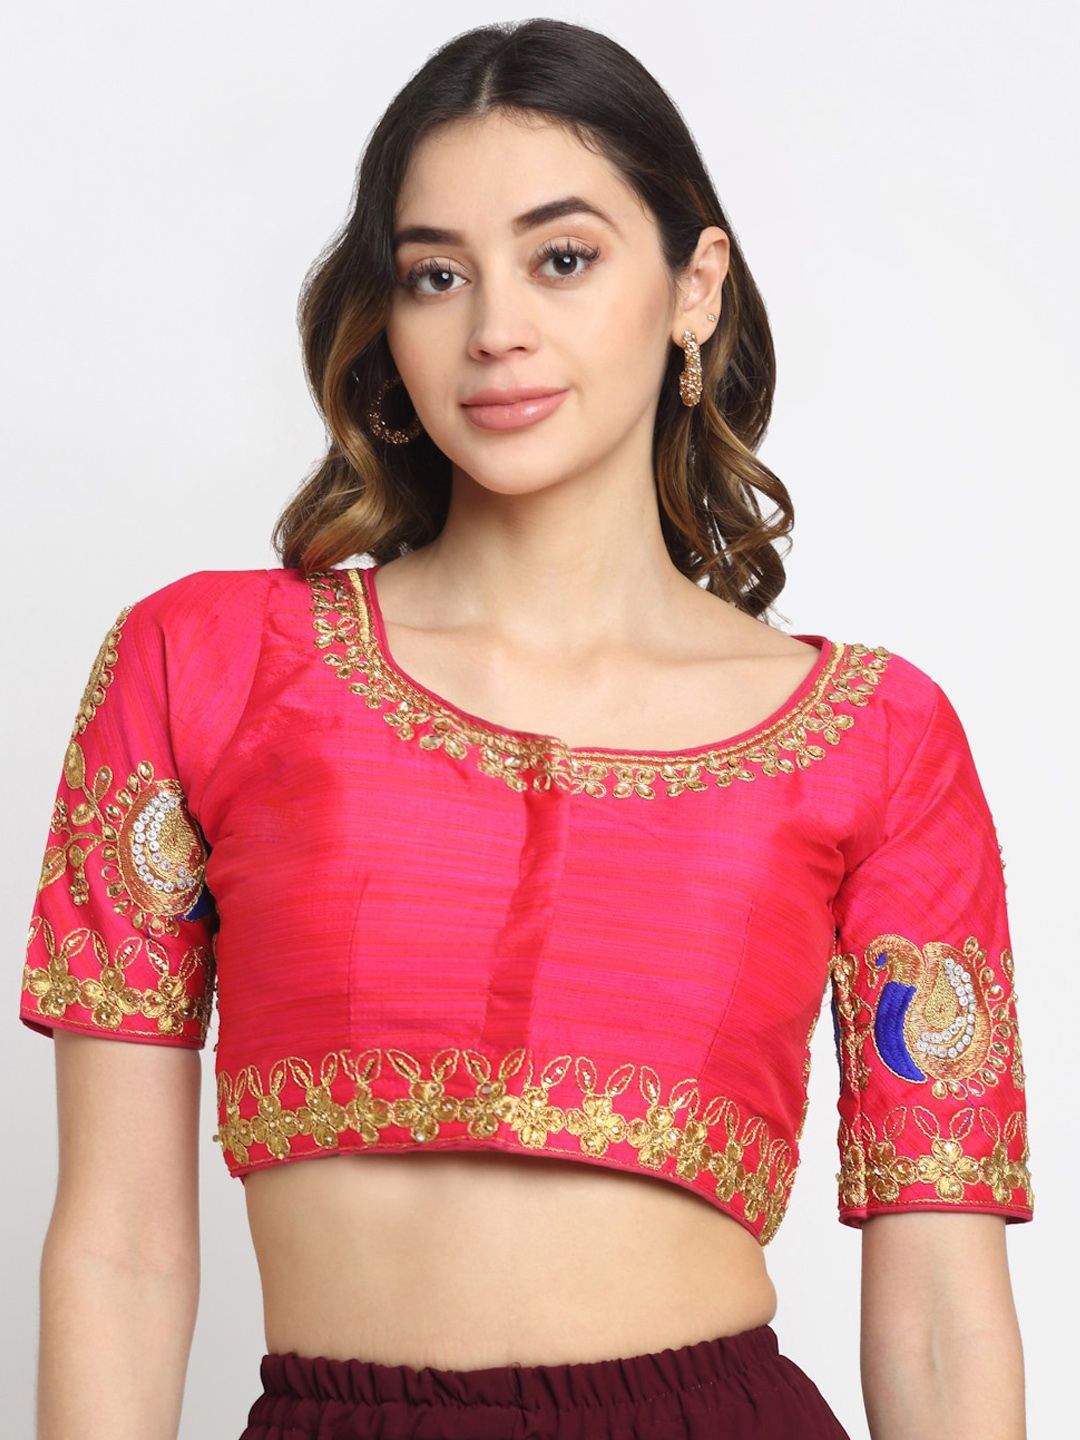 Grancy Women Fuchsia & Golden Colored Embroidered Round Neck Saree Blouse Price in India